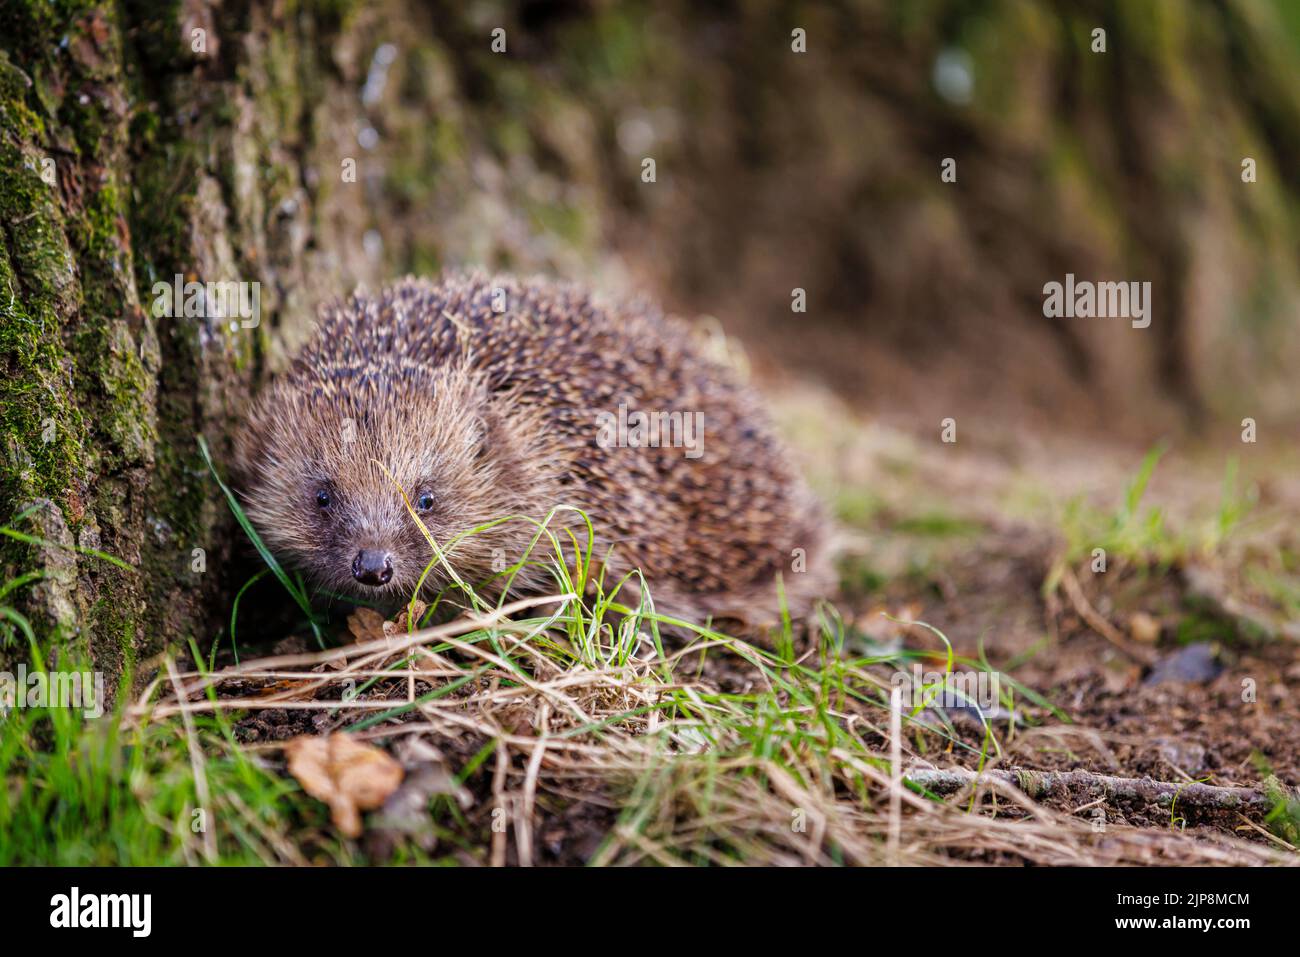 Common or European hedgehog (Erinaceus europaeus), a spiny mammal, seen close-up at the foot of a tree in Surrey, south-east England Stock Photo